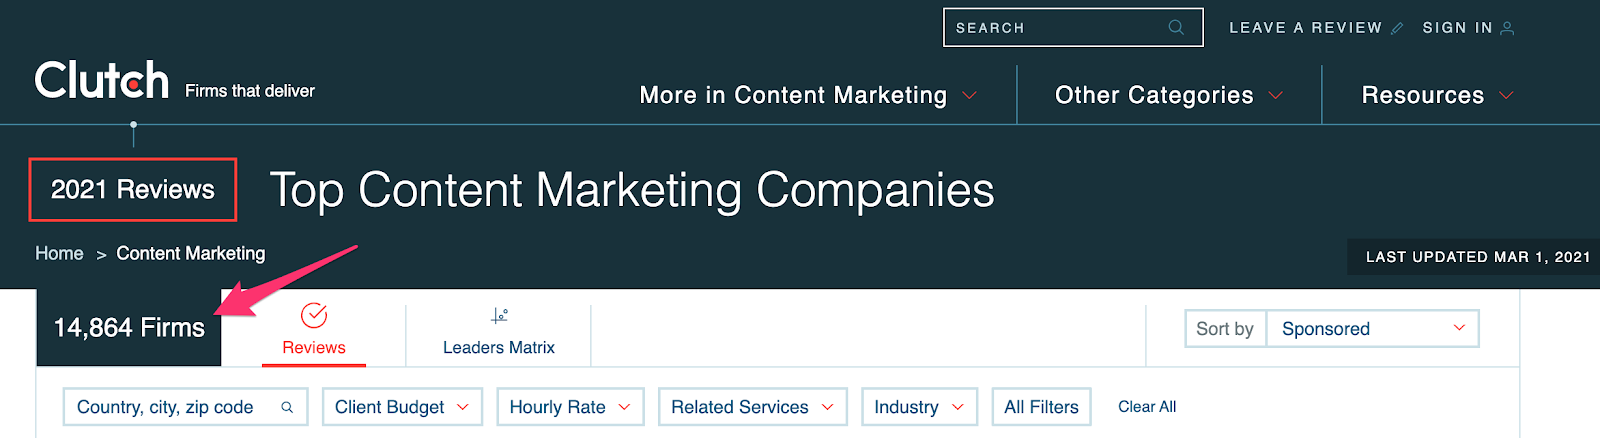 7 questions to ask when hiring a content marketing agency